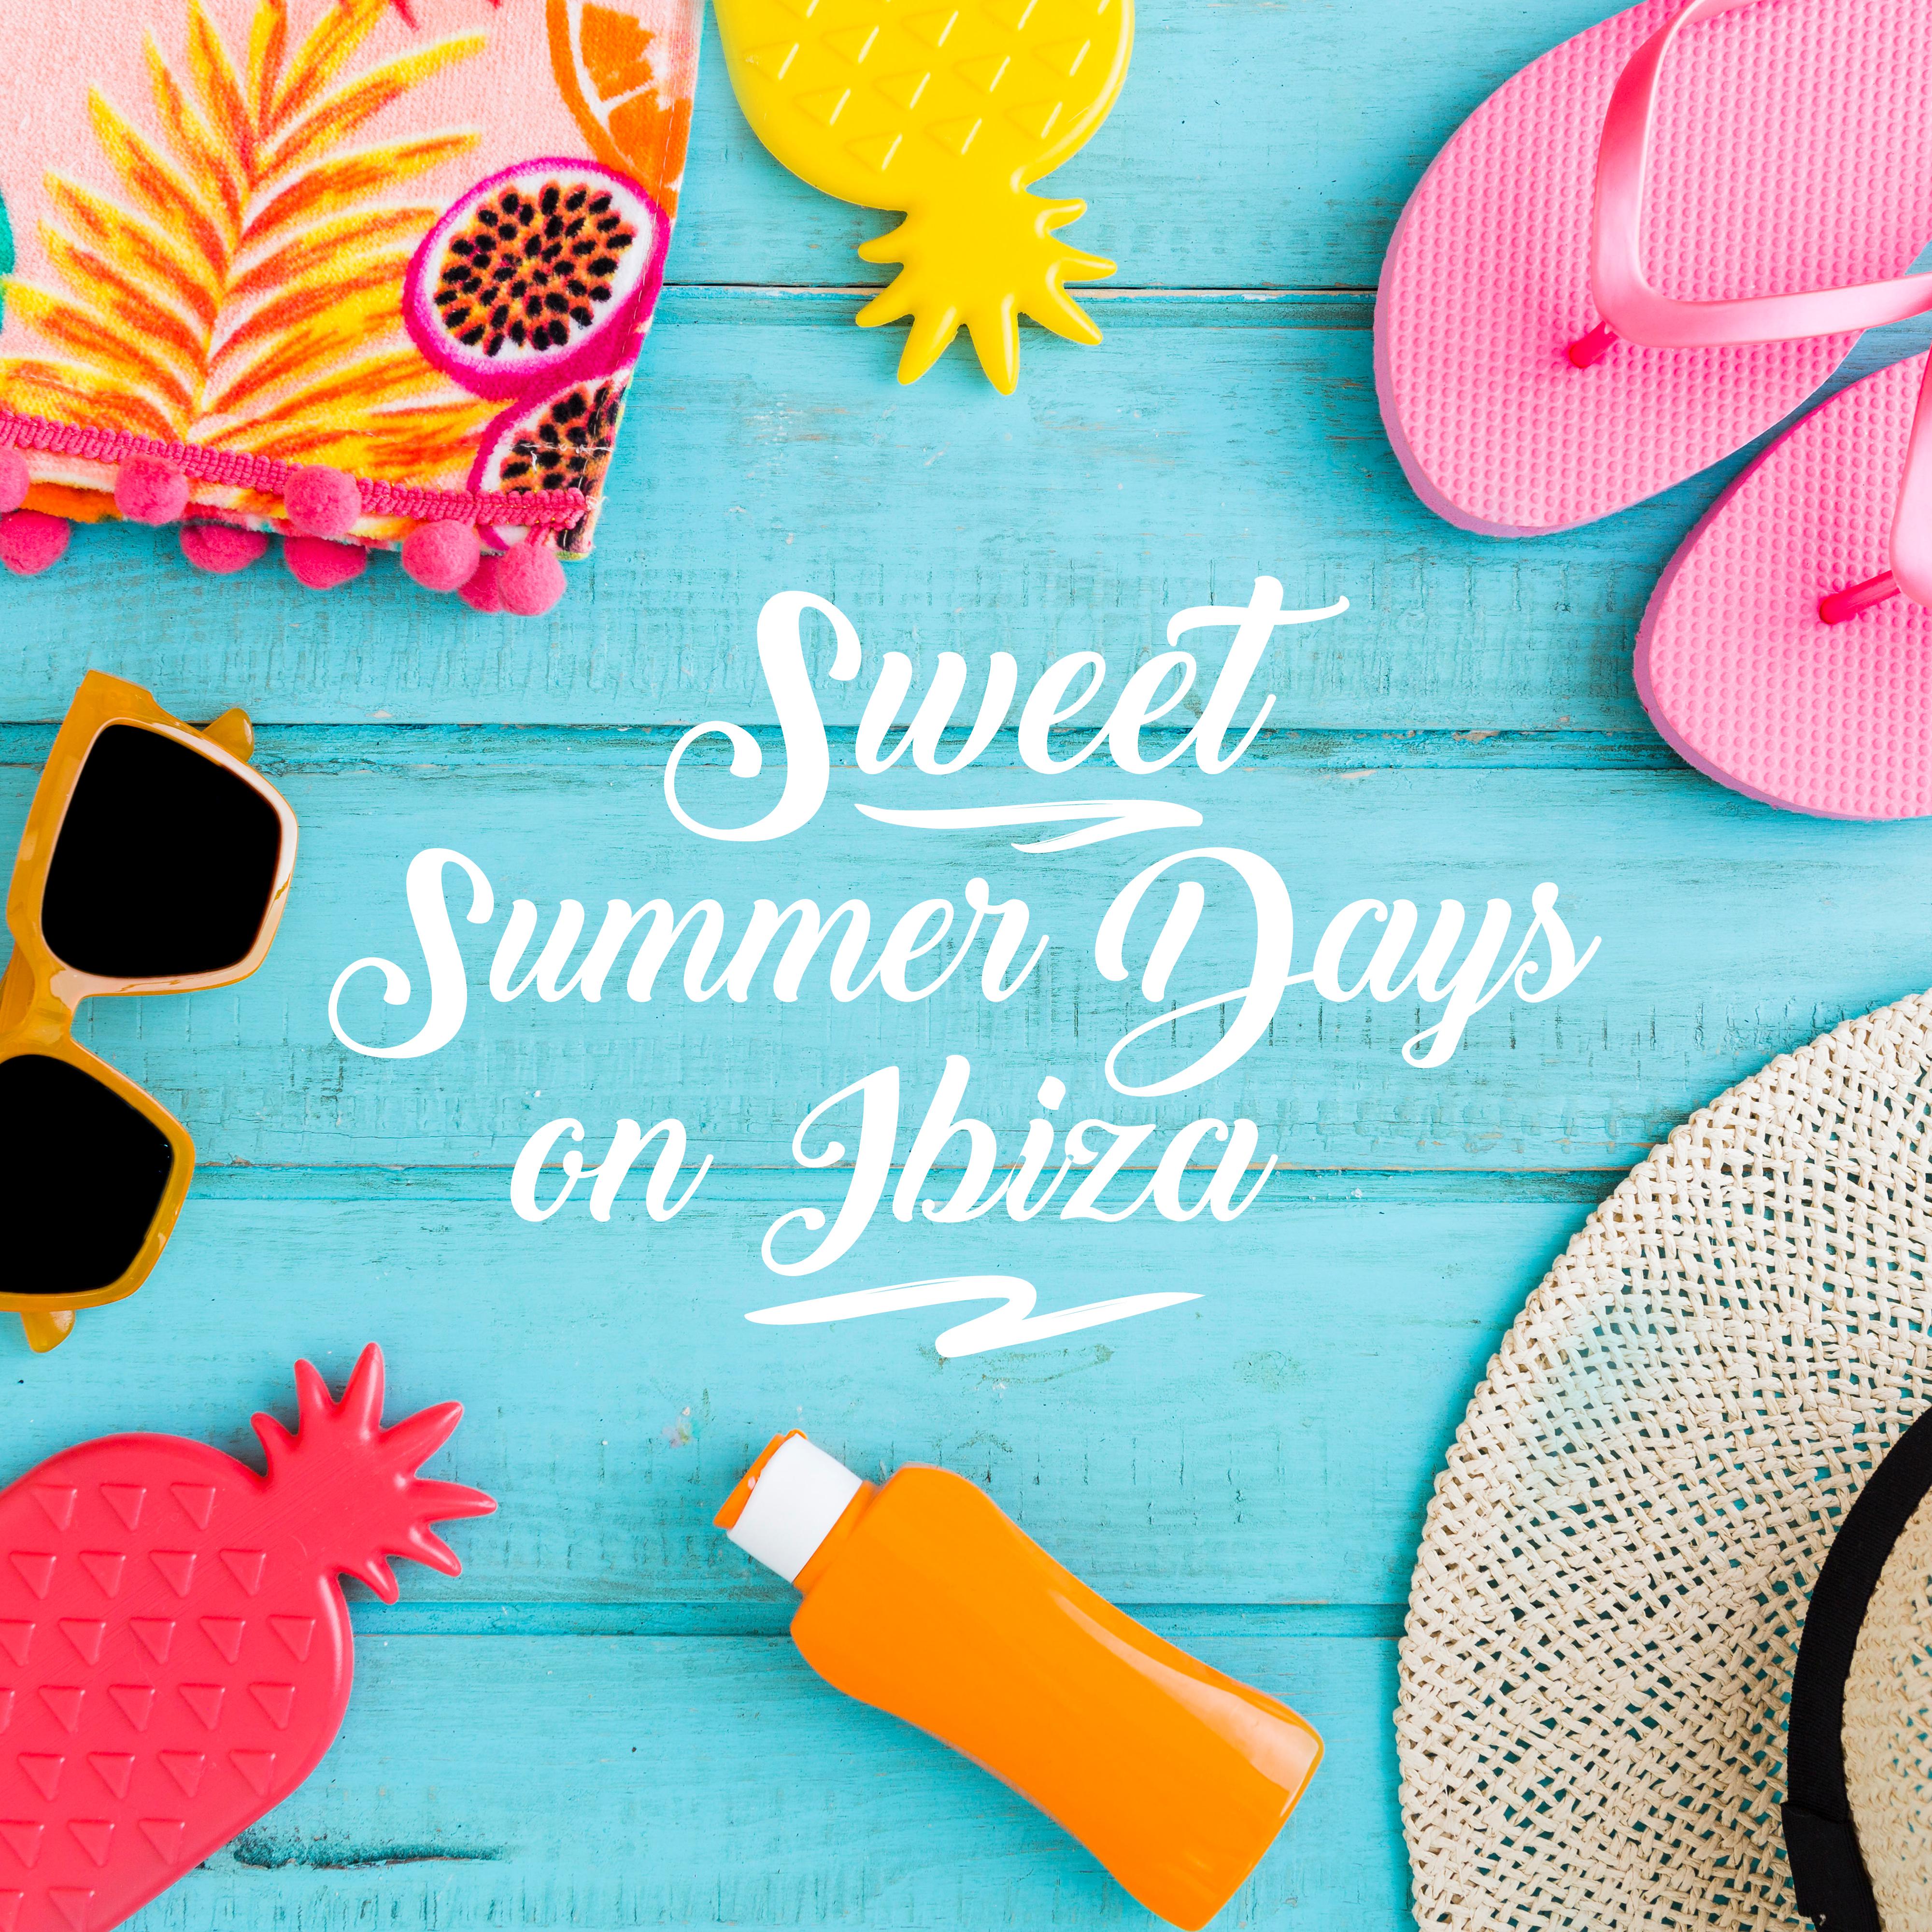 Sweet Summer Days on Ibiza: Most Relaxing 2019 Chillout Music Selection for Best Holiday Experience, Beats & Melodies for Total Chill, Calm Down & Rest, Vacation on the Beach Anthems